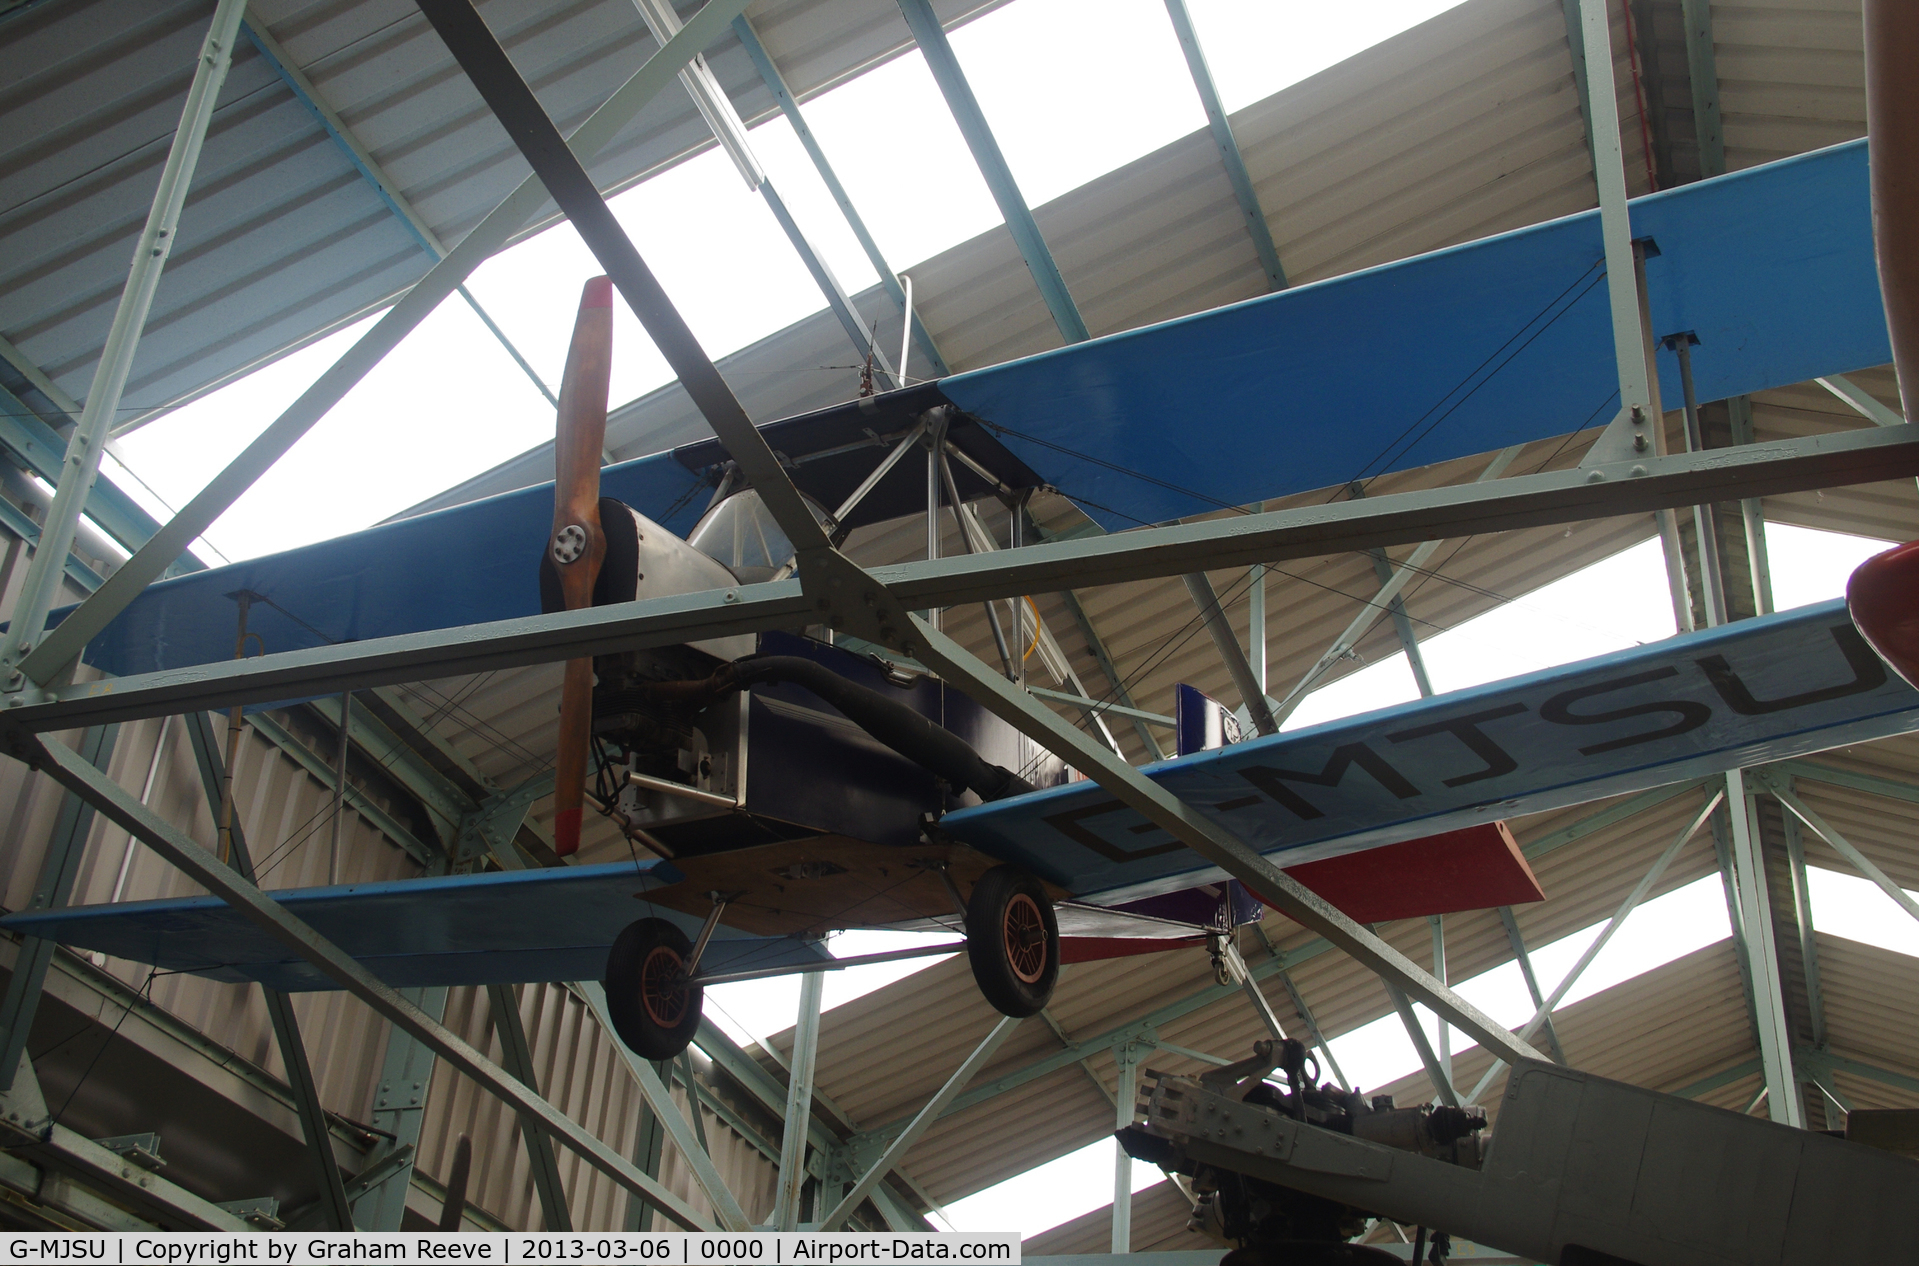 G-MJSU, Flylite (east Anglia) TIGER CUB C/N SO175, Preserved at the Norfolk and Suffolk Aviation Museum, Flixton.